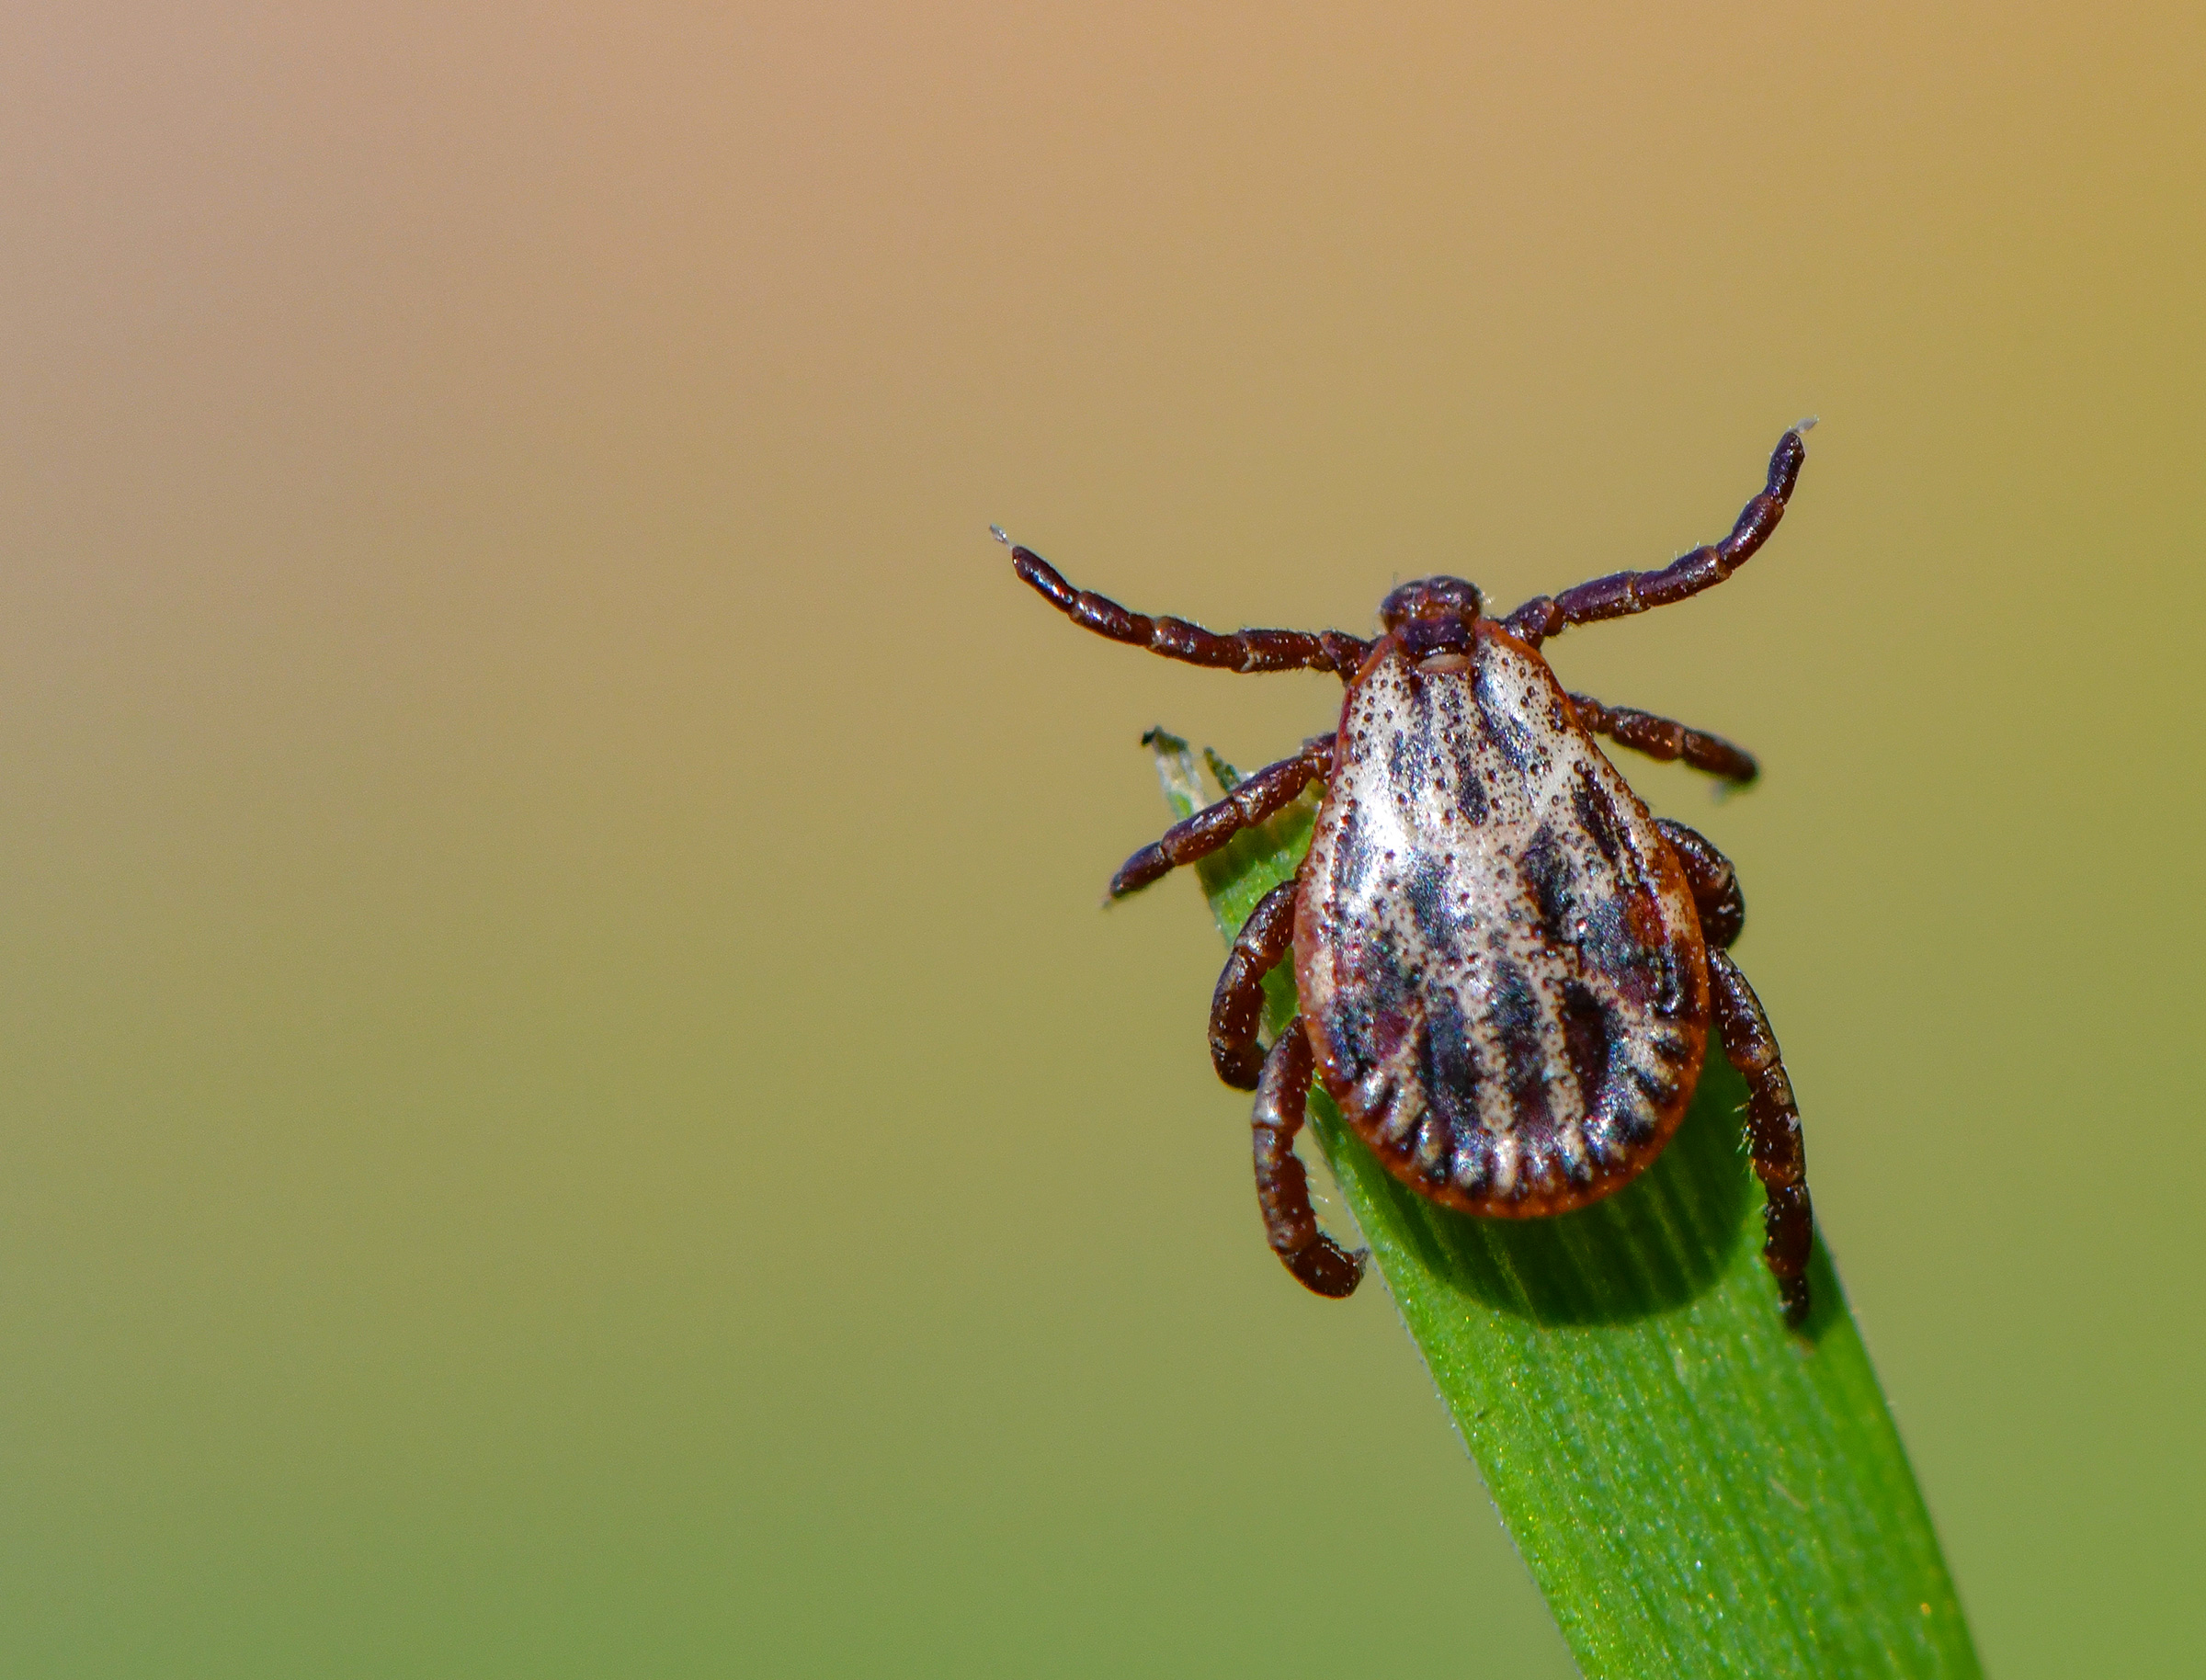 A tick quests on a blade of grass for its next blood meal. (Patrick Pleul—Picture Alliance/Getty Images)